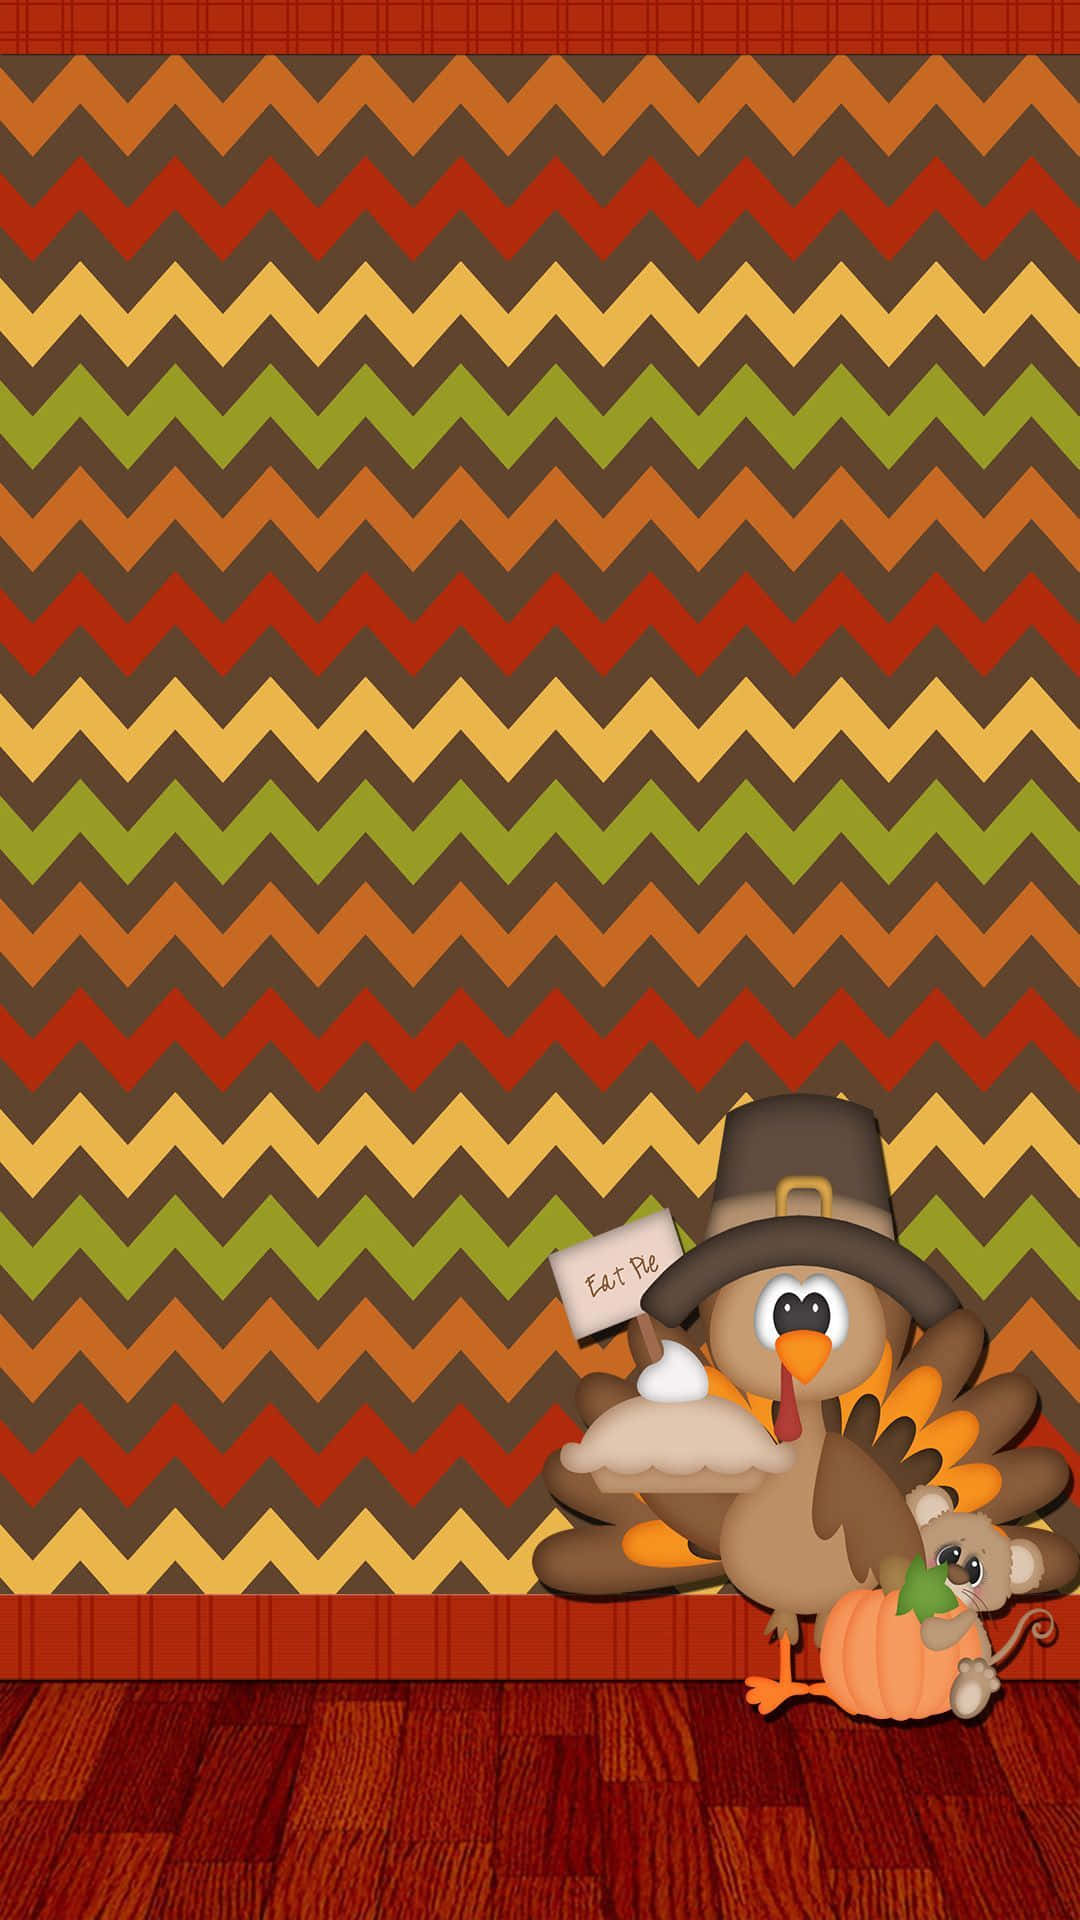 Reach out and show your gratitude this Thanksgiving. Wallpaper